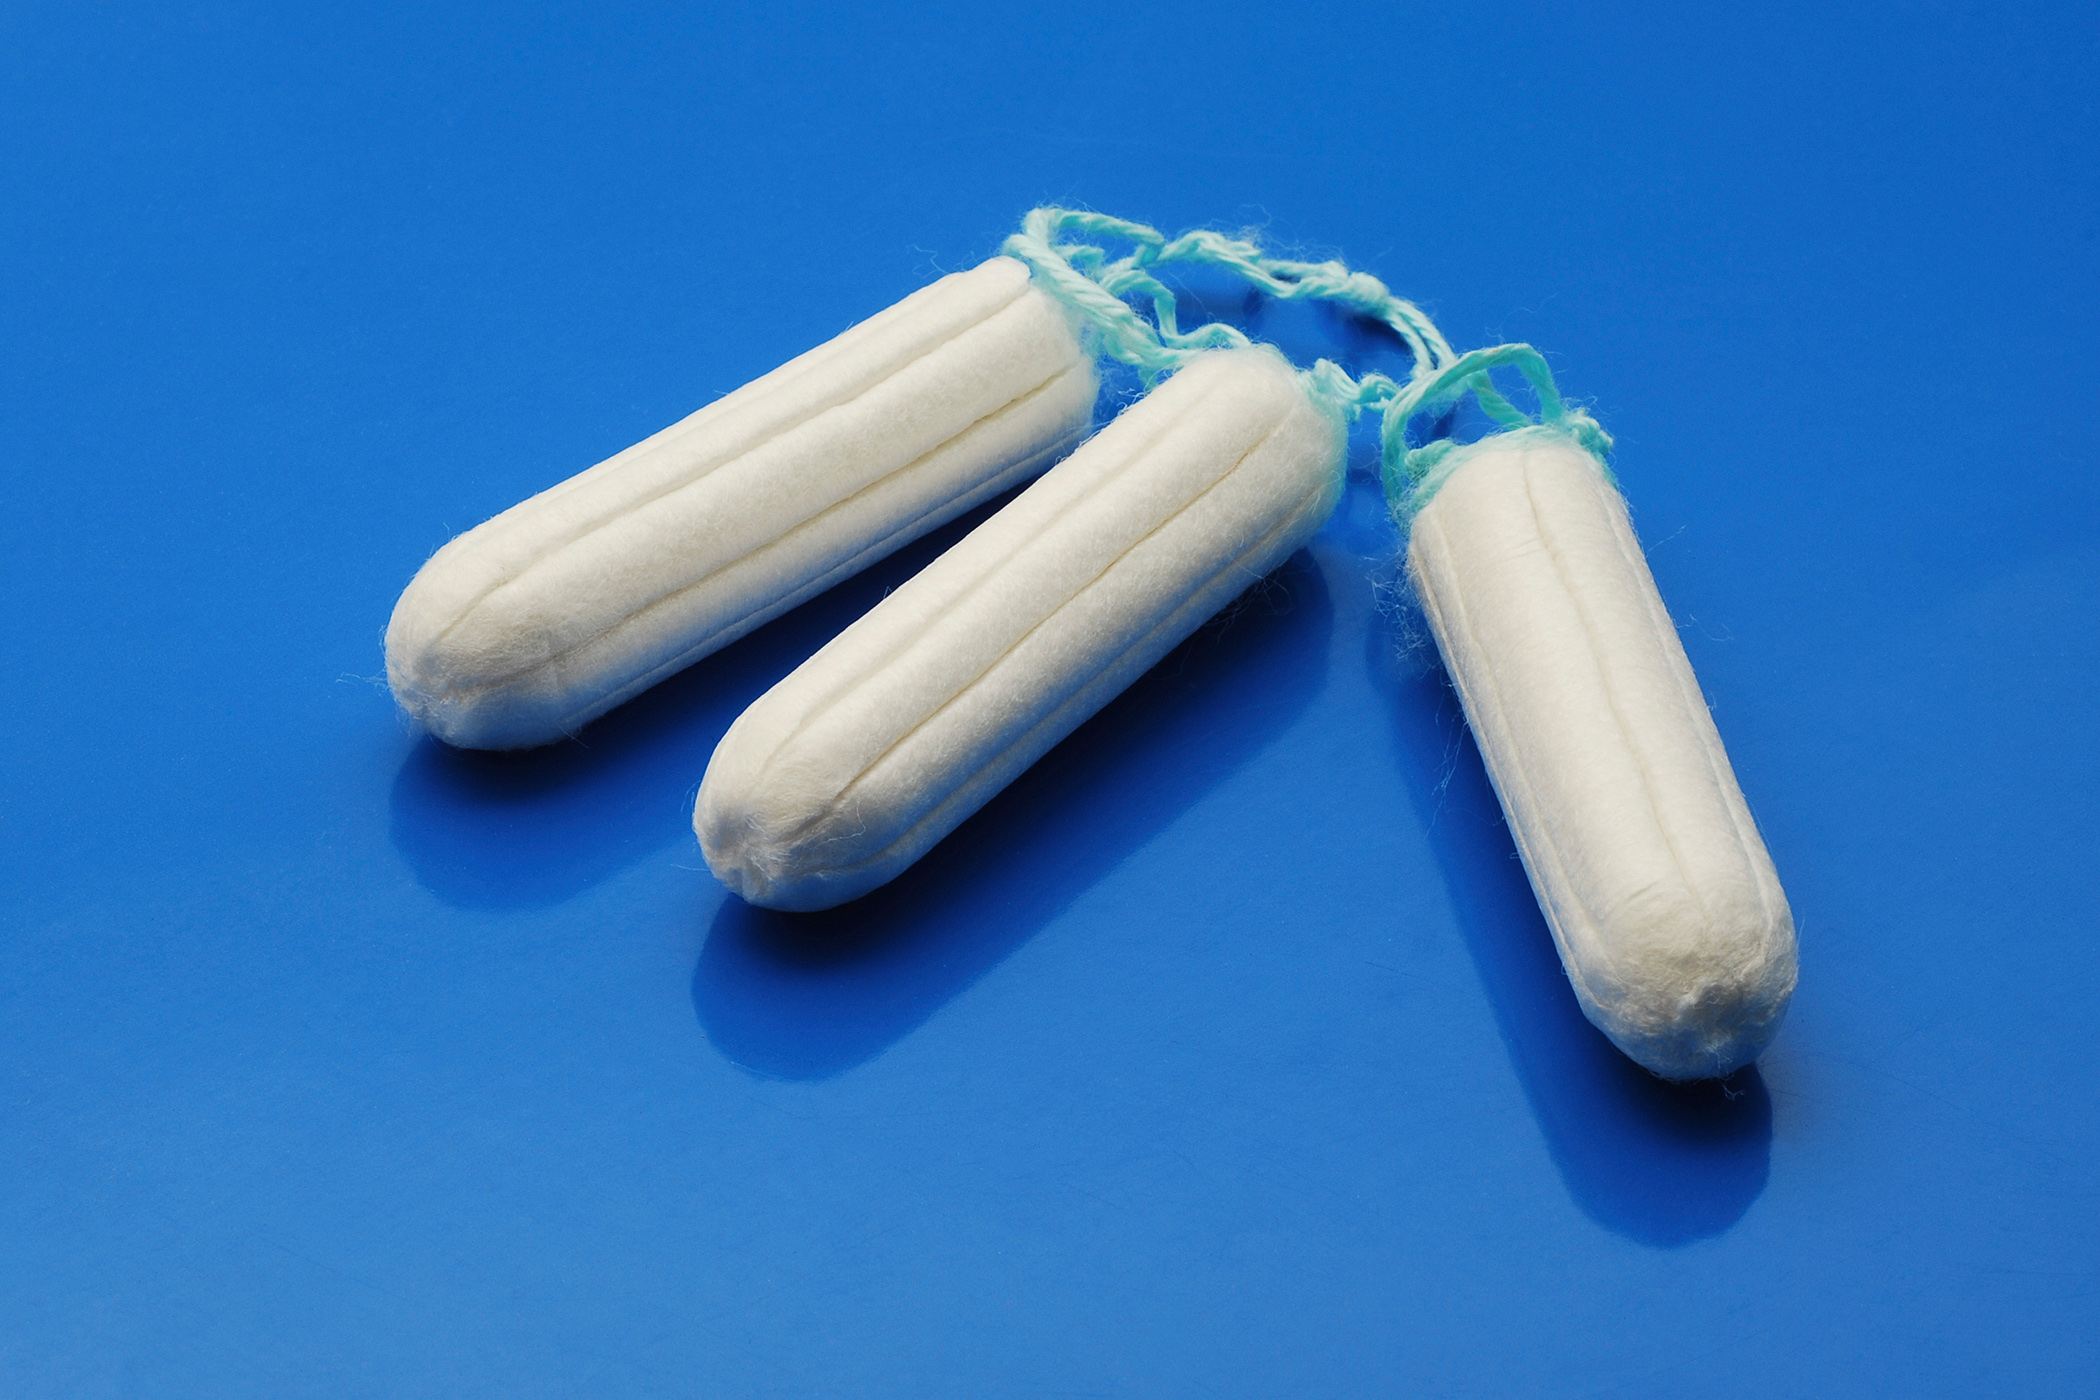 A Few Places Finally Agree to Stop Taxing Tampons